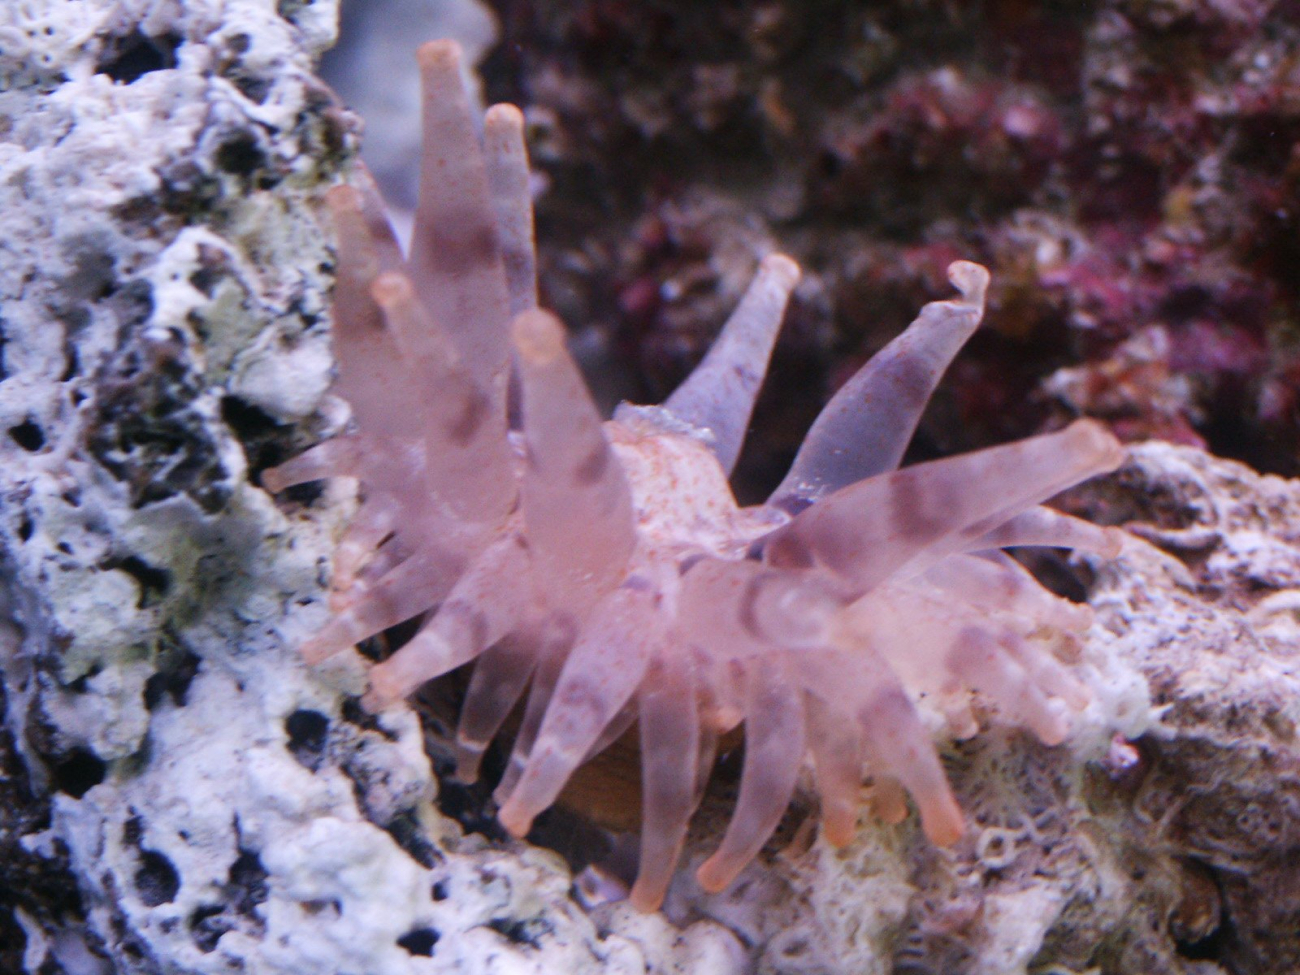 This sea anemone collected during the mission sits insidethe onboard aquarium of the R/V Seaward Johnson